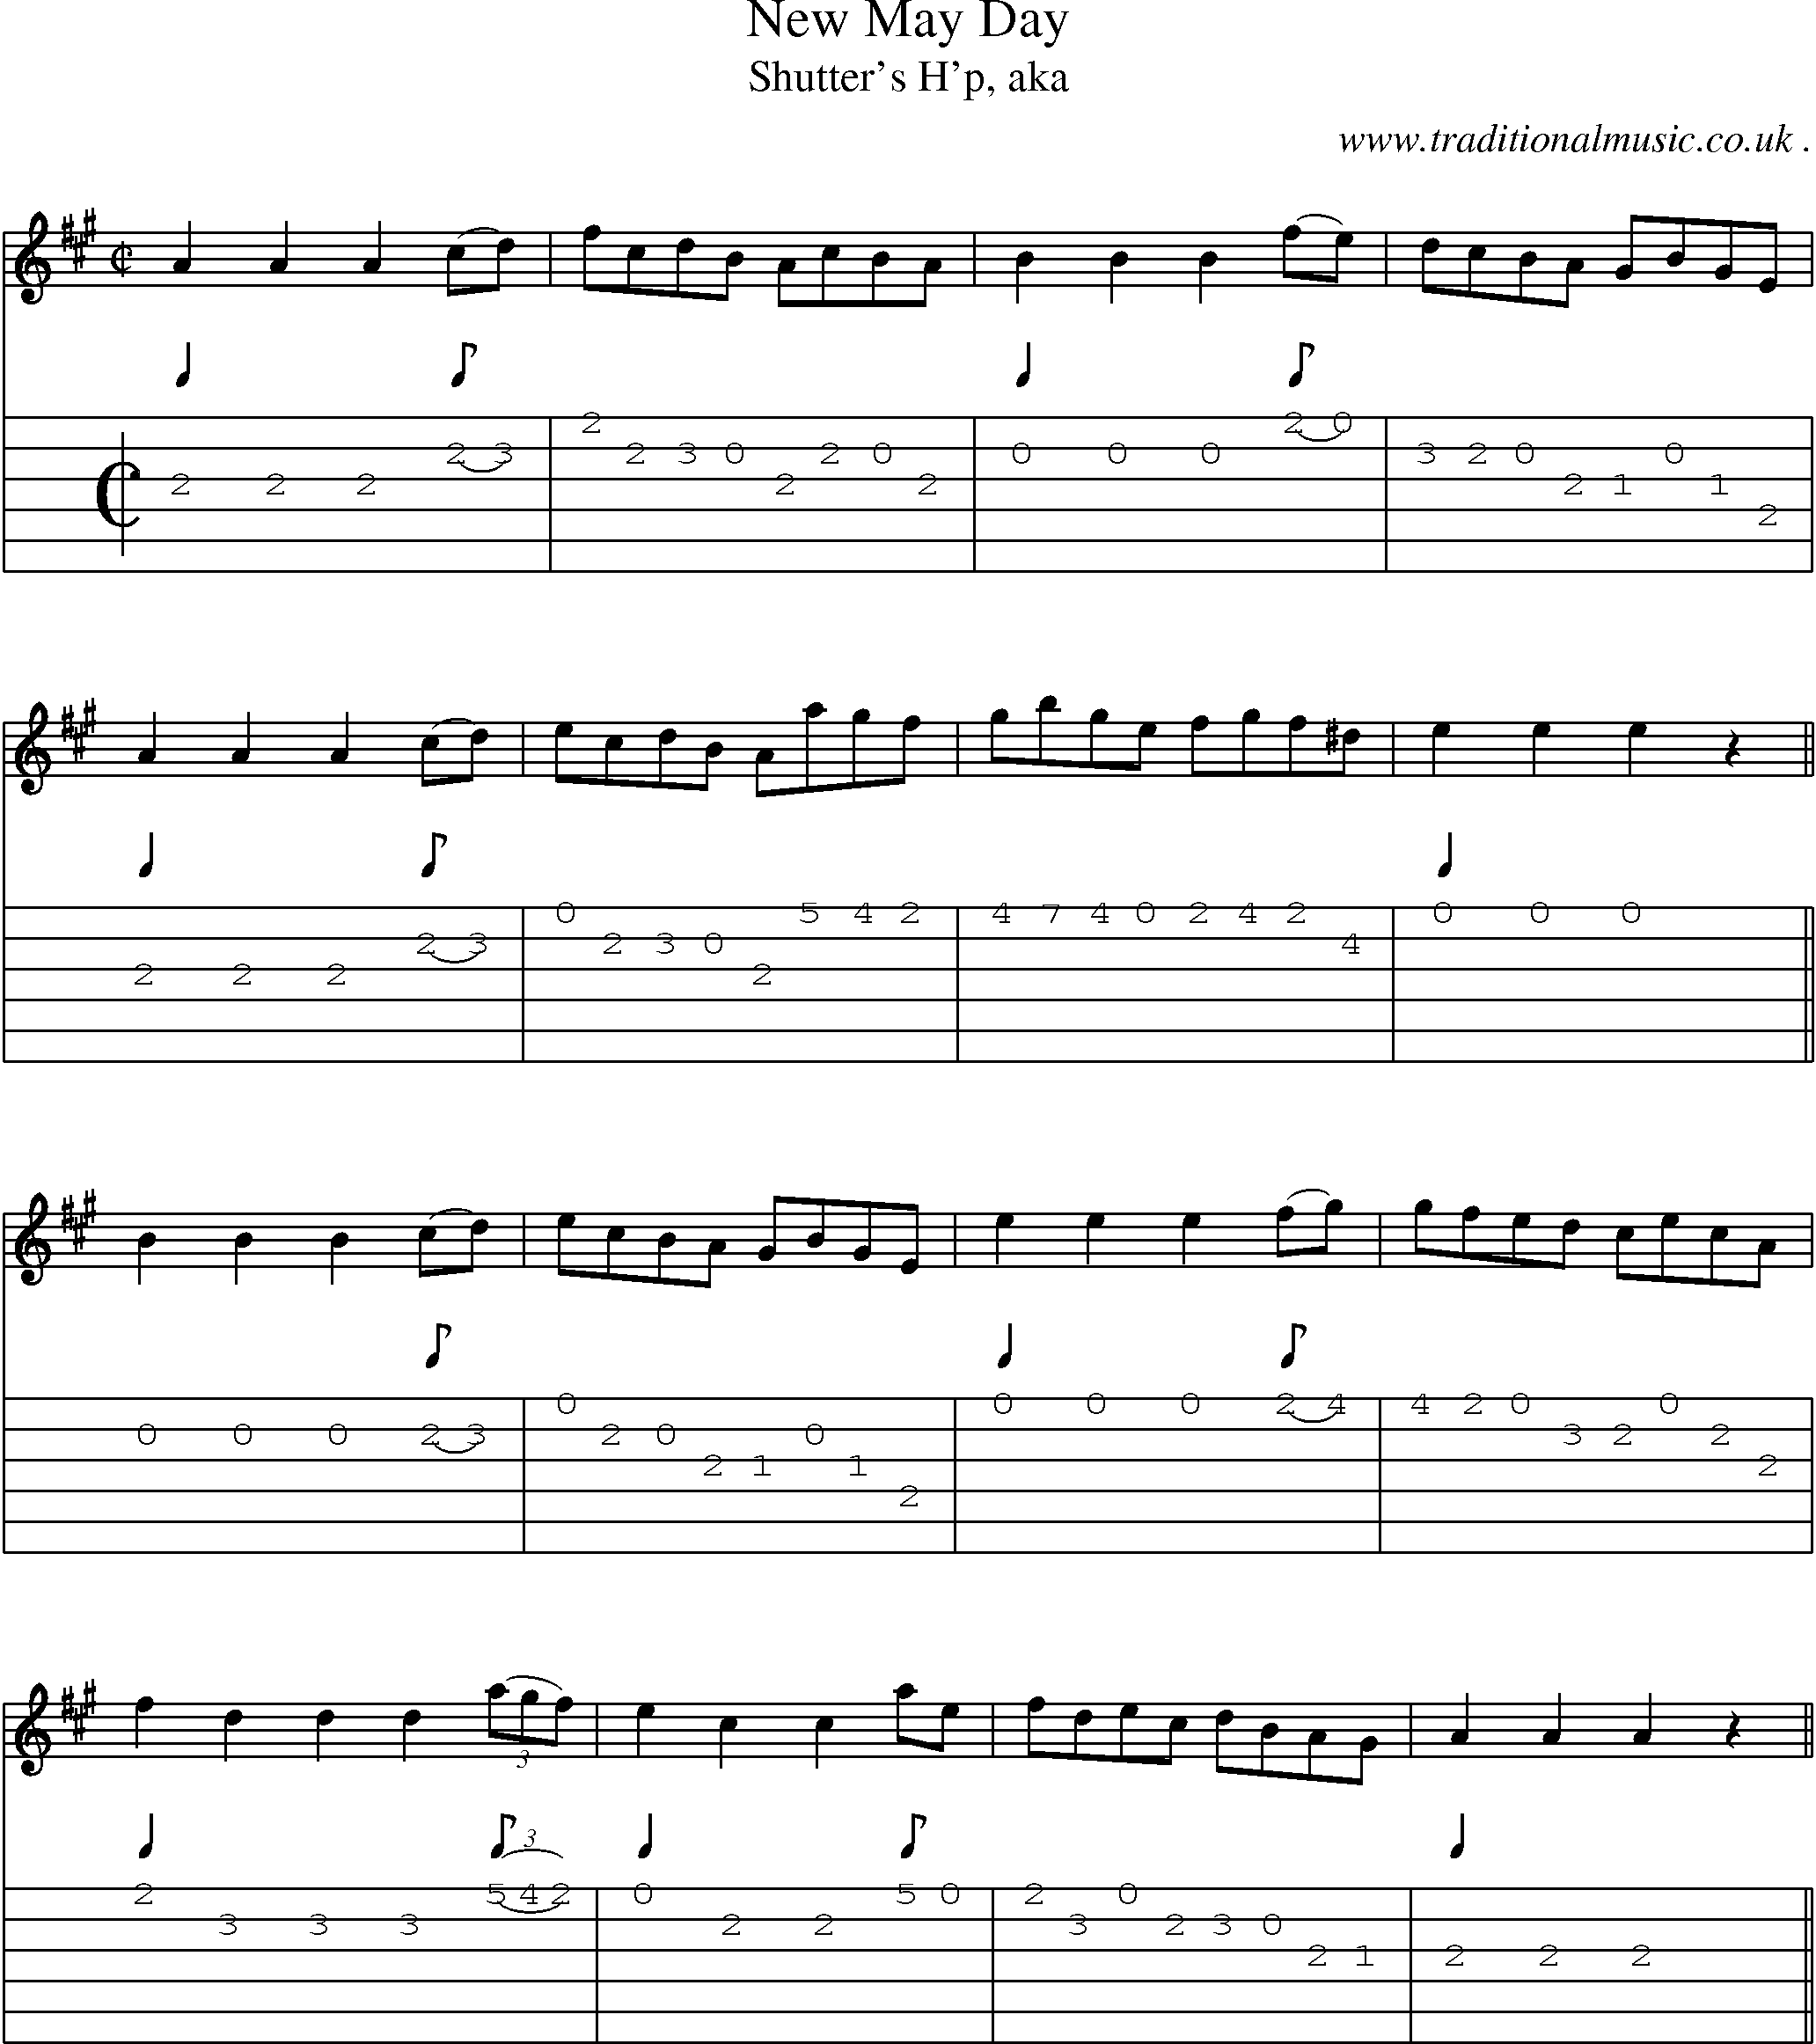 Sheet-Music and Guitar Tabs for New May Day